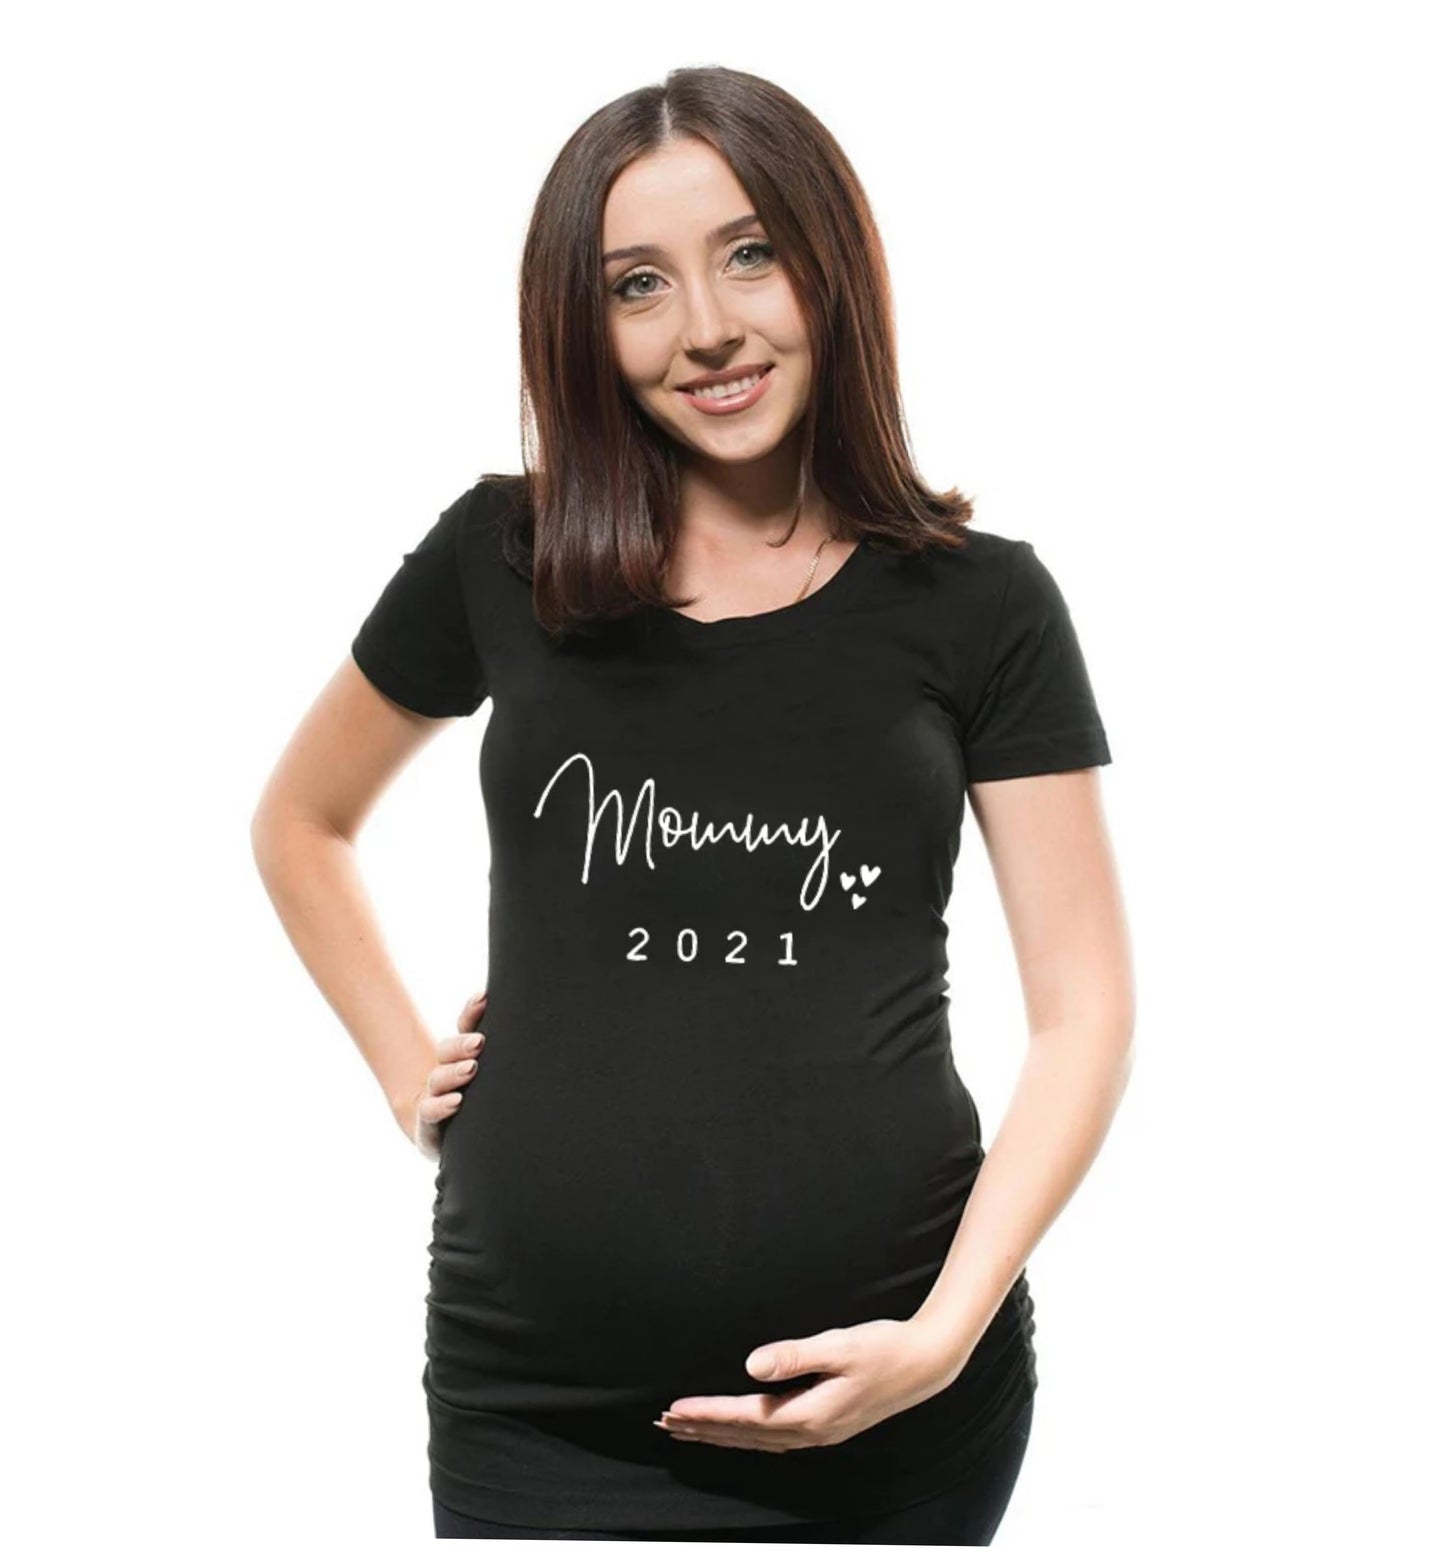 Mommy 2021 Maternity t shirt for women|mom to be t shirt|half sleeve t shirt womens | Maternity Dress|round neck t shirt